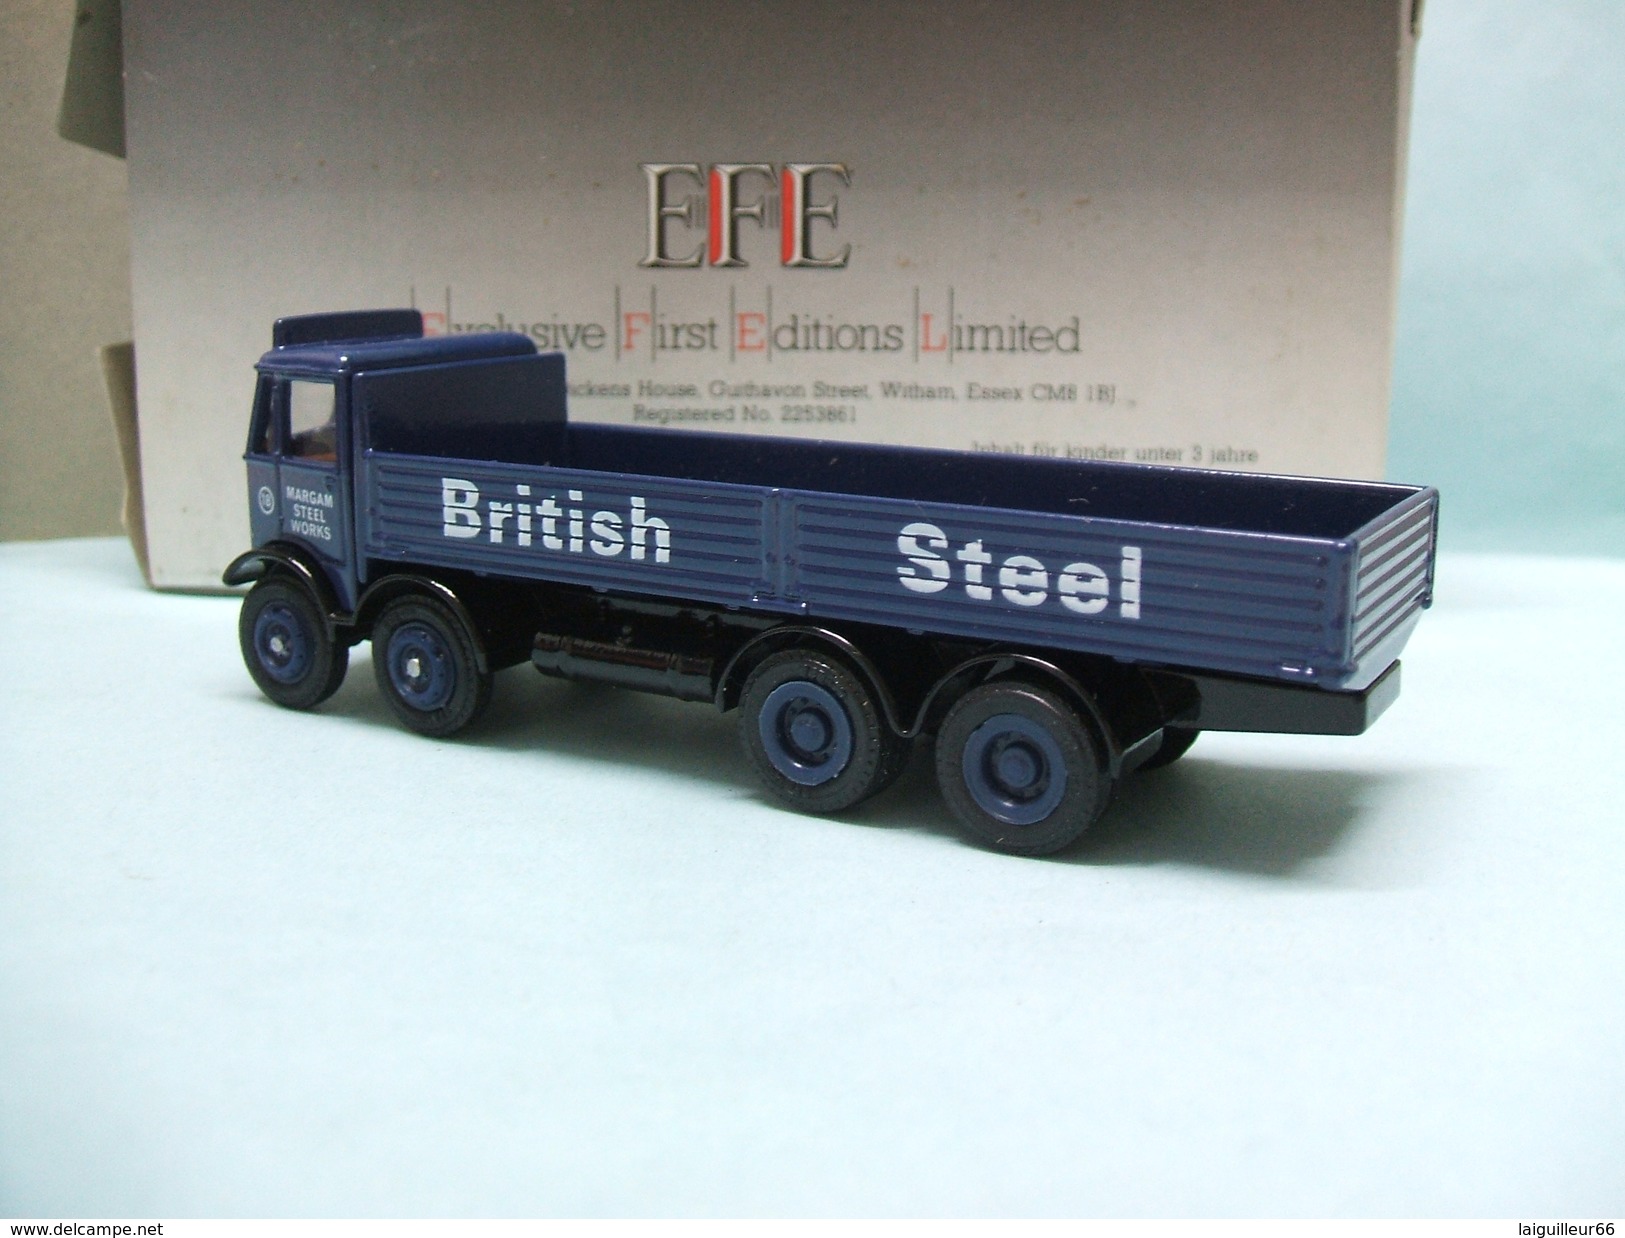 EFE - CAMION AEC MAMMOTH BRITISH STEEL Réf. E 10801 BO 1/76 OO - Scale 1:76